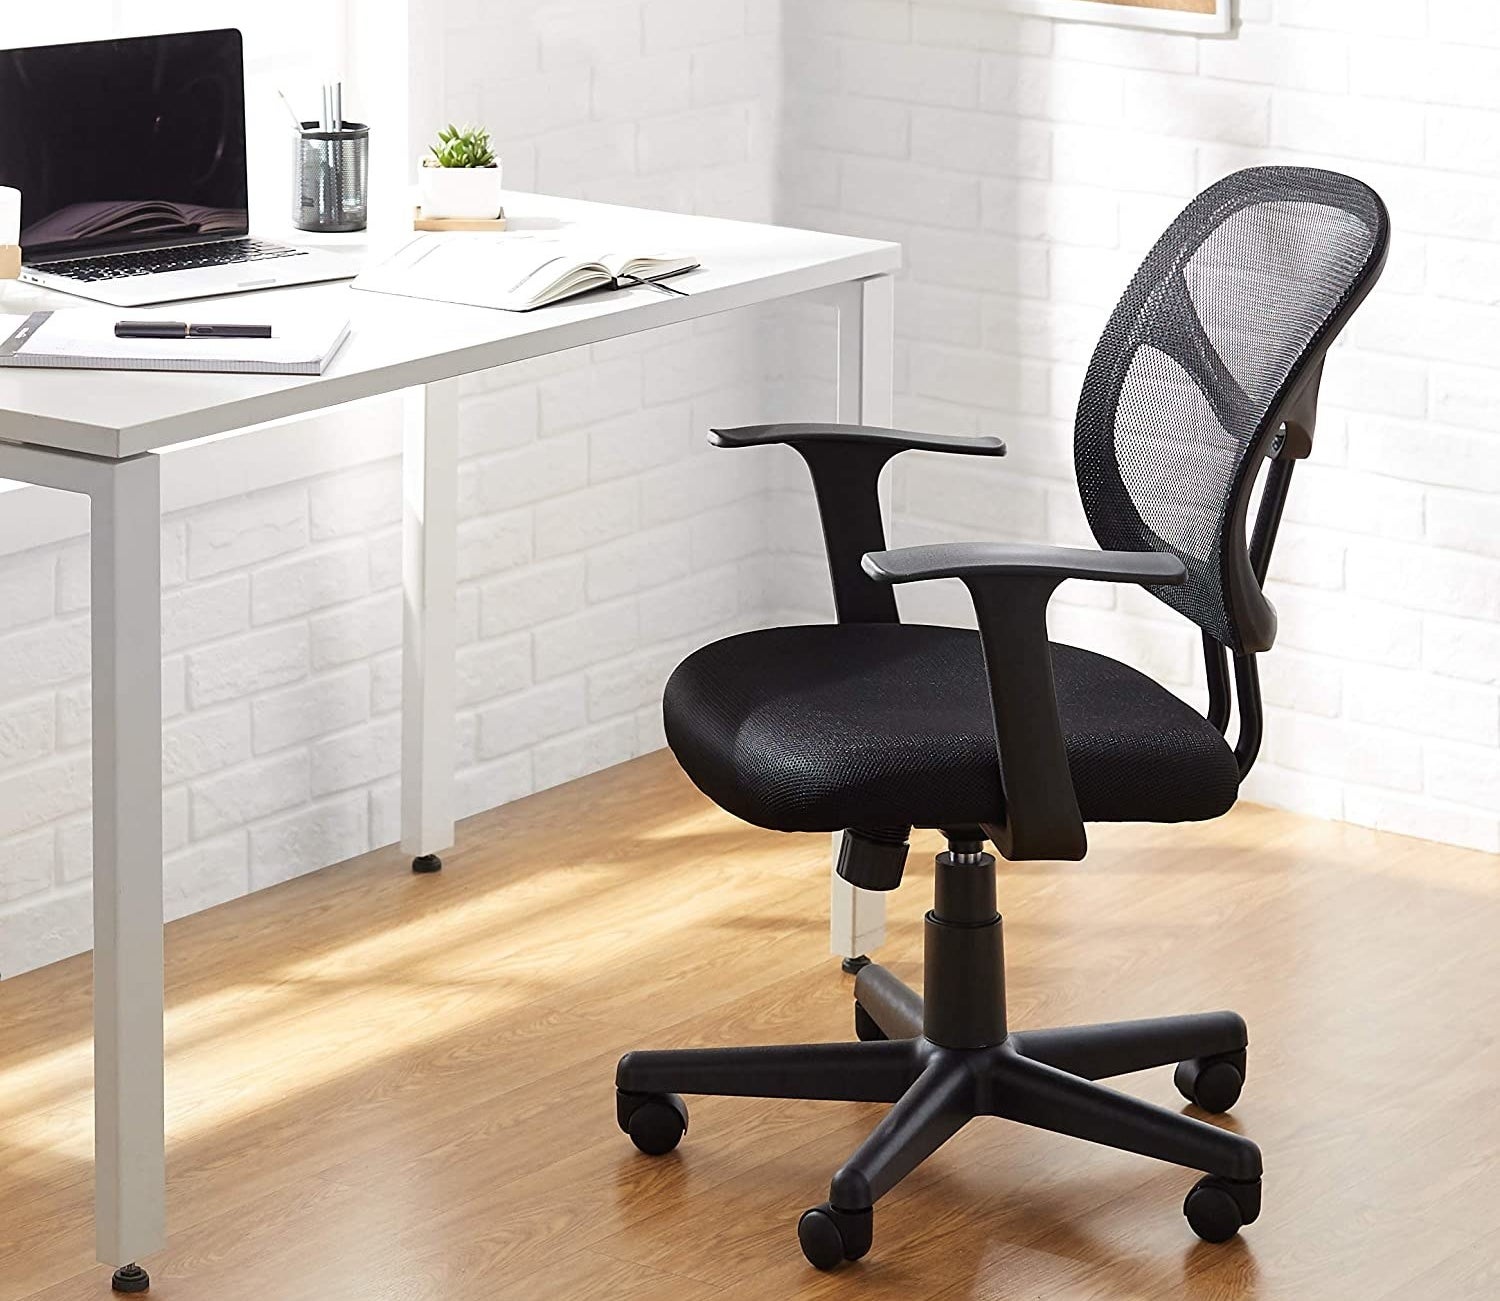 An office chair in front of a desk